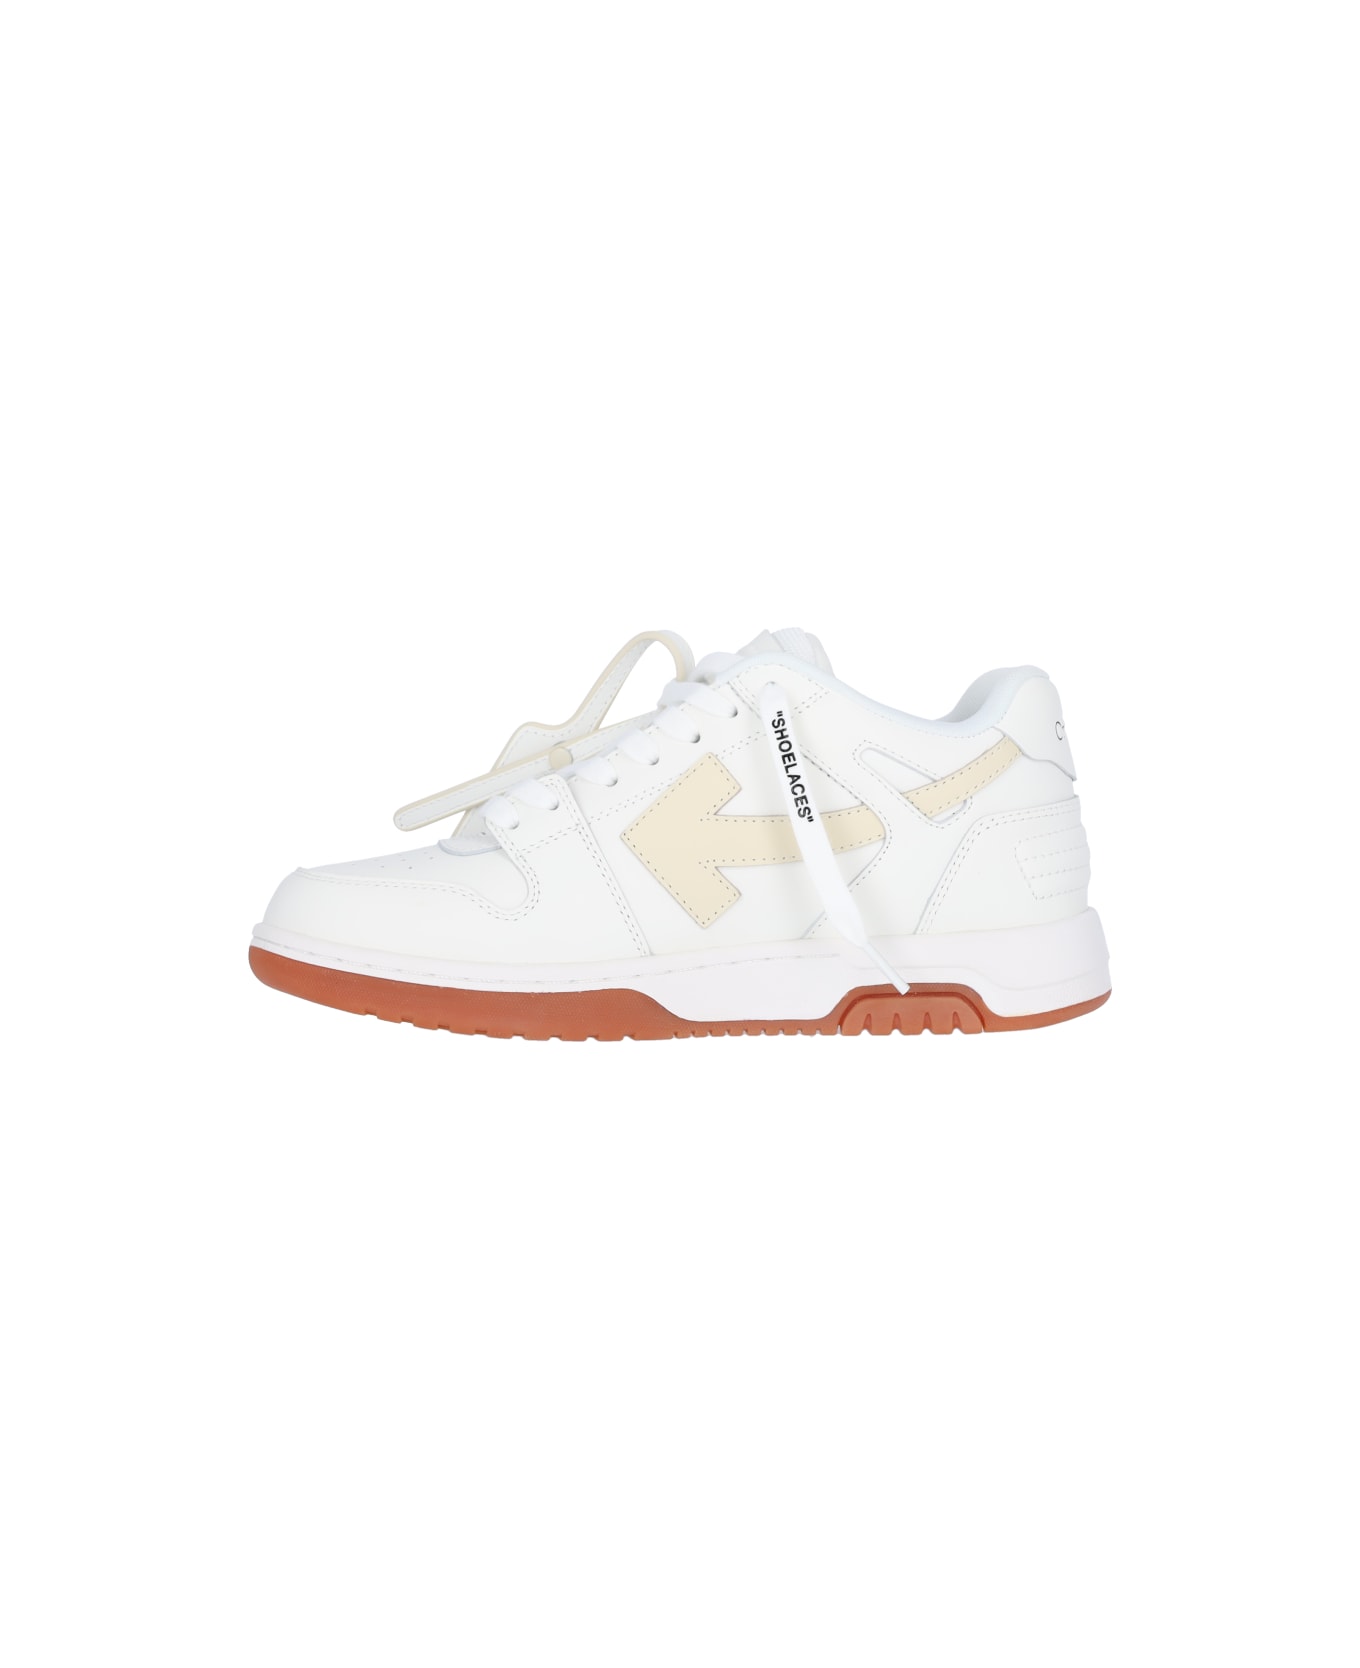 Off-White 'out Of Office' Sneakers - White